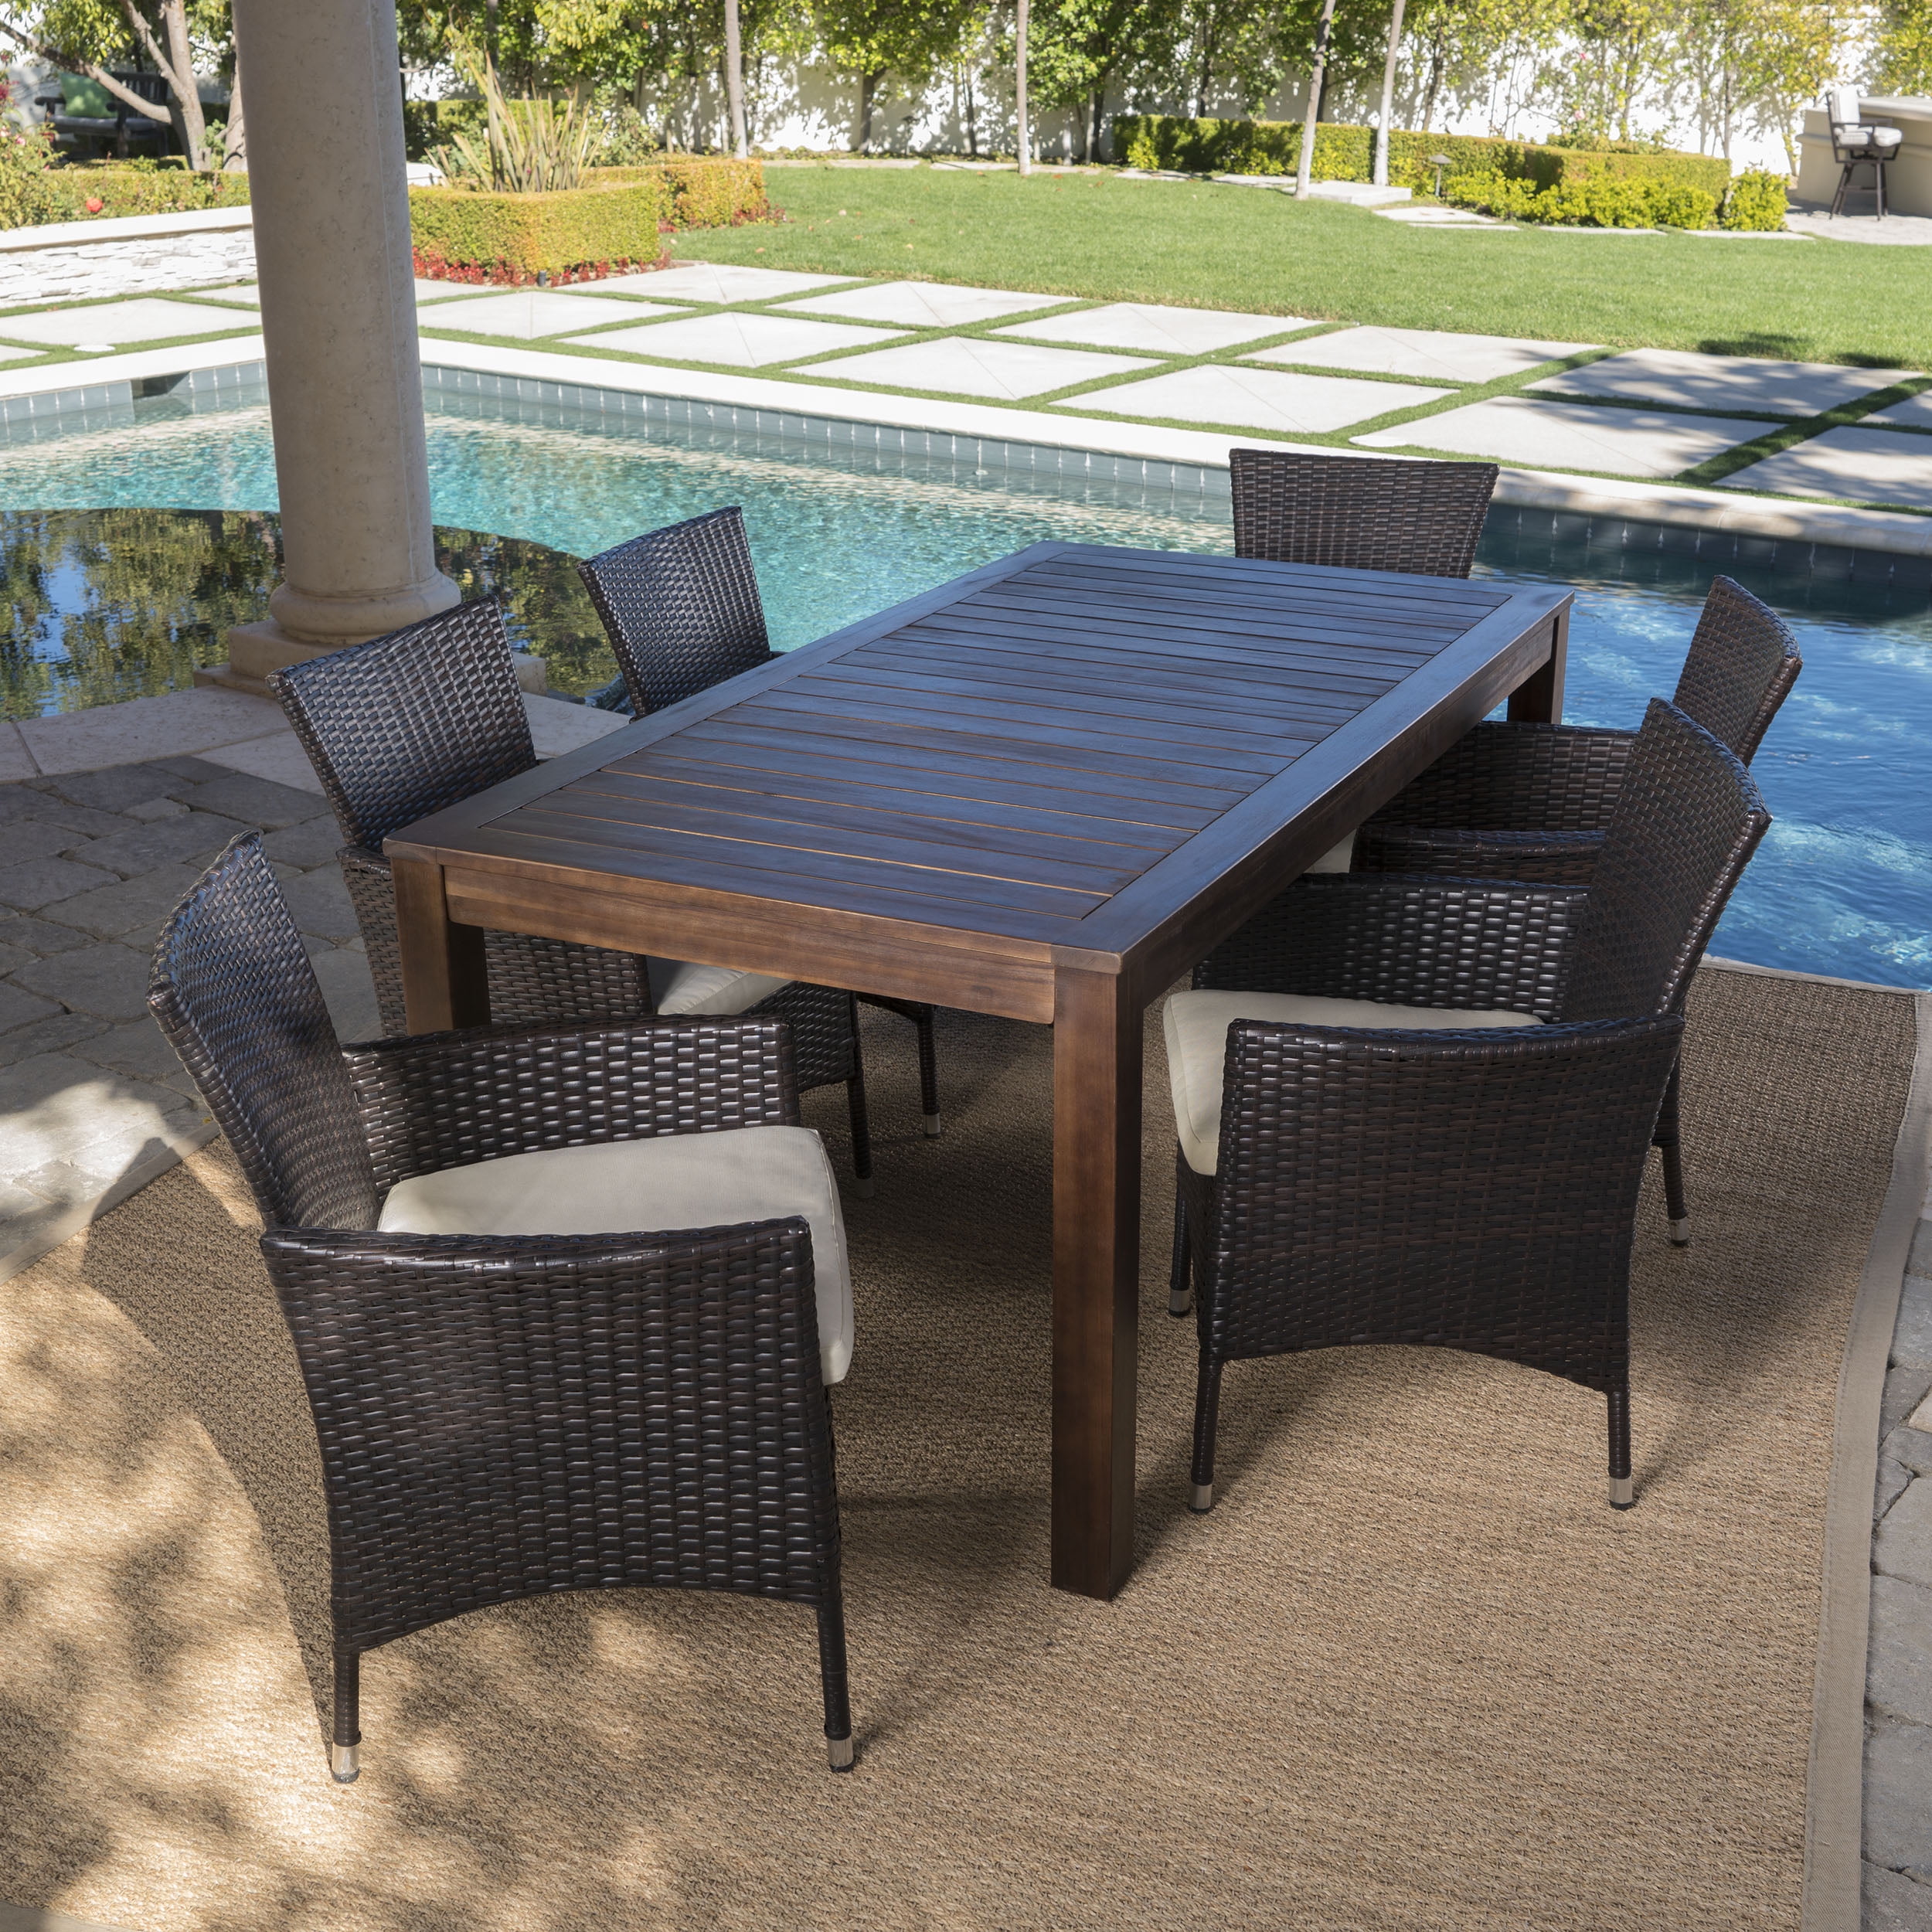 Taft Outdoor 7 Piece Dining Set with Wood Table and Wicker Chairs with